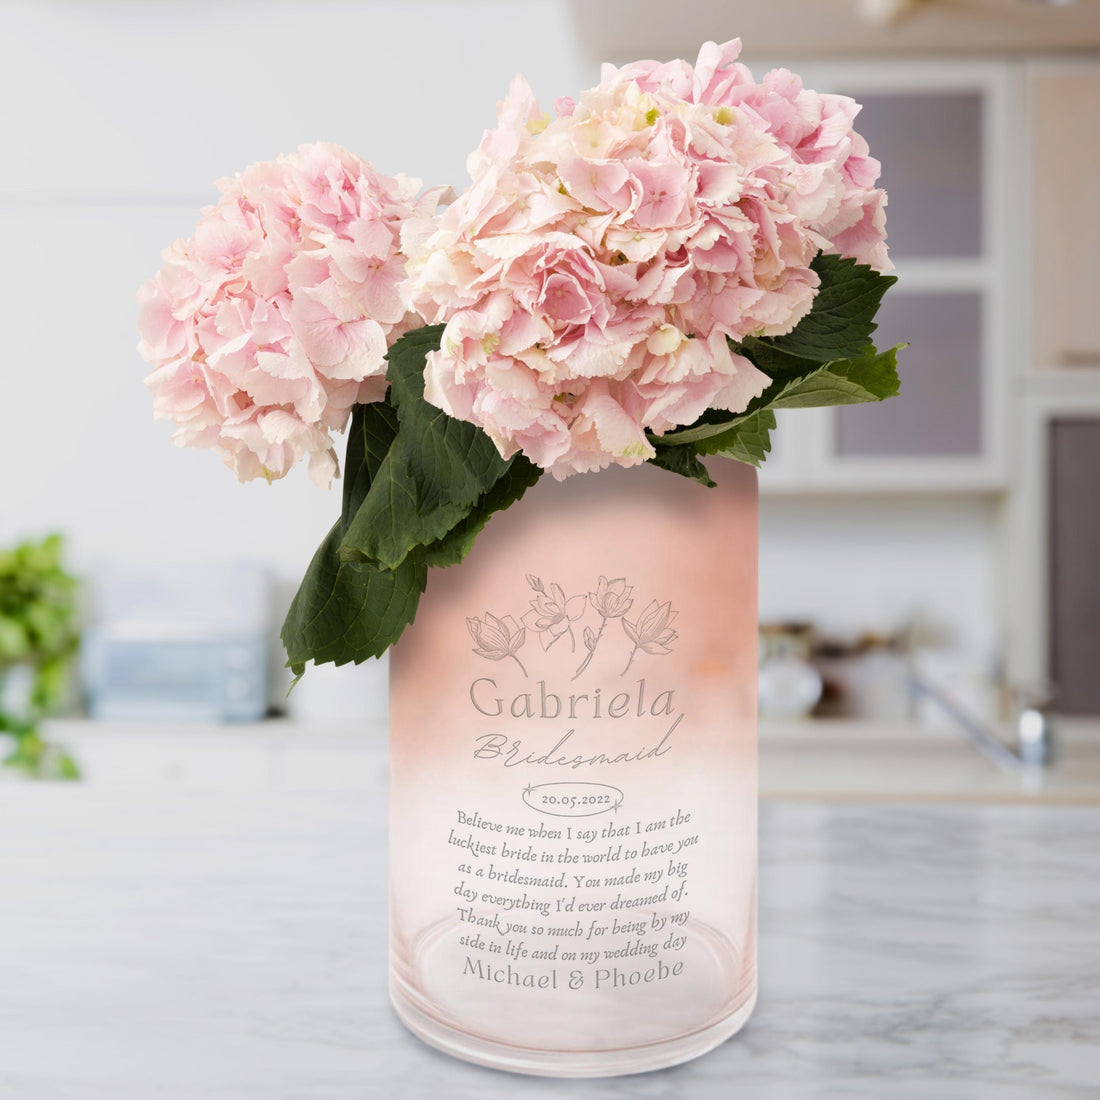 Personalised Curved Cylinder Frosted Pink Glass Vase, Engraved Memorial Wedding, Bridesmaid, Bride's Mother, Housewarming, Anniversary Gift